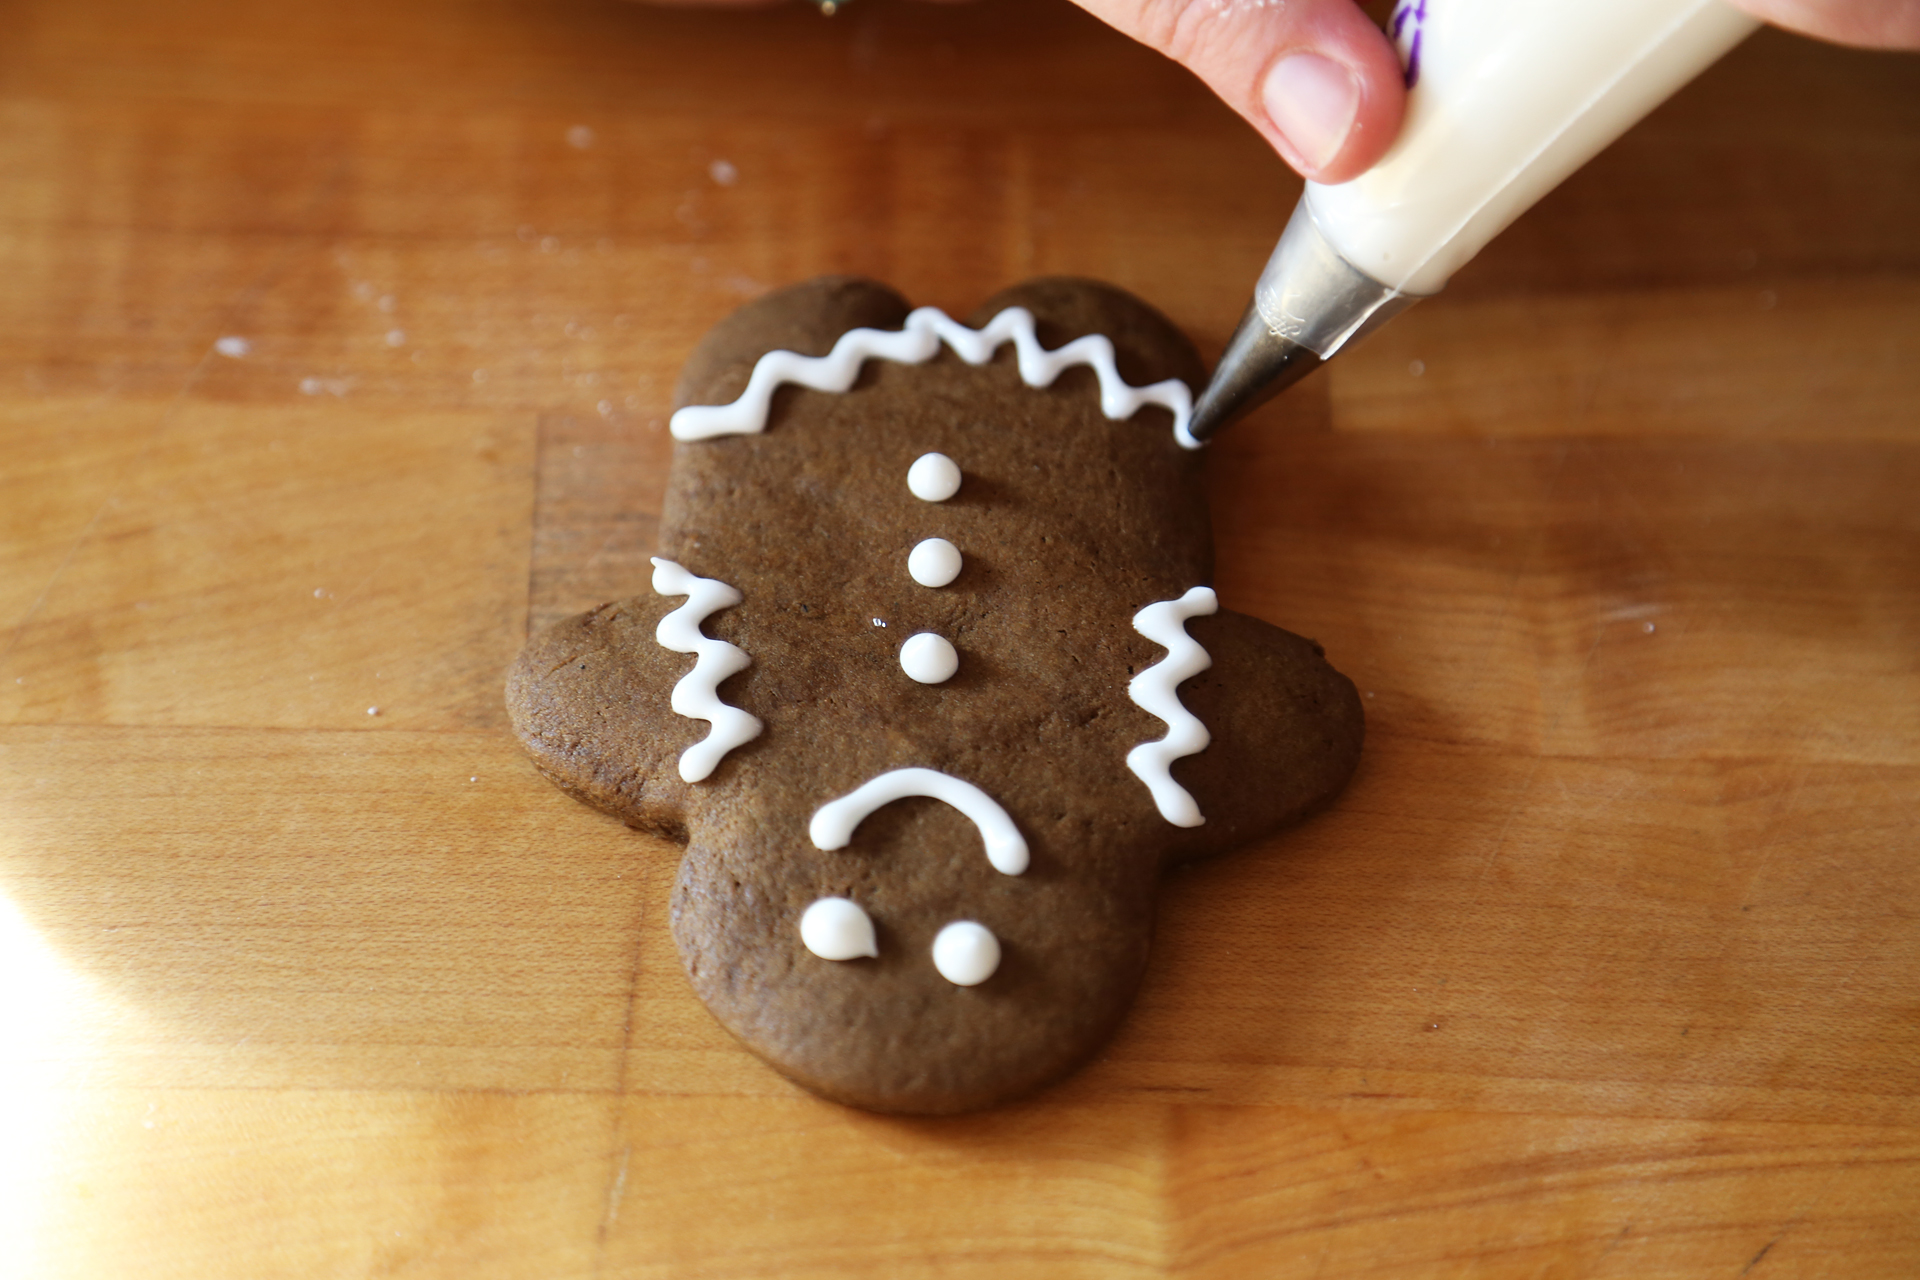 Decorating a gingerbread person with royal icing.